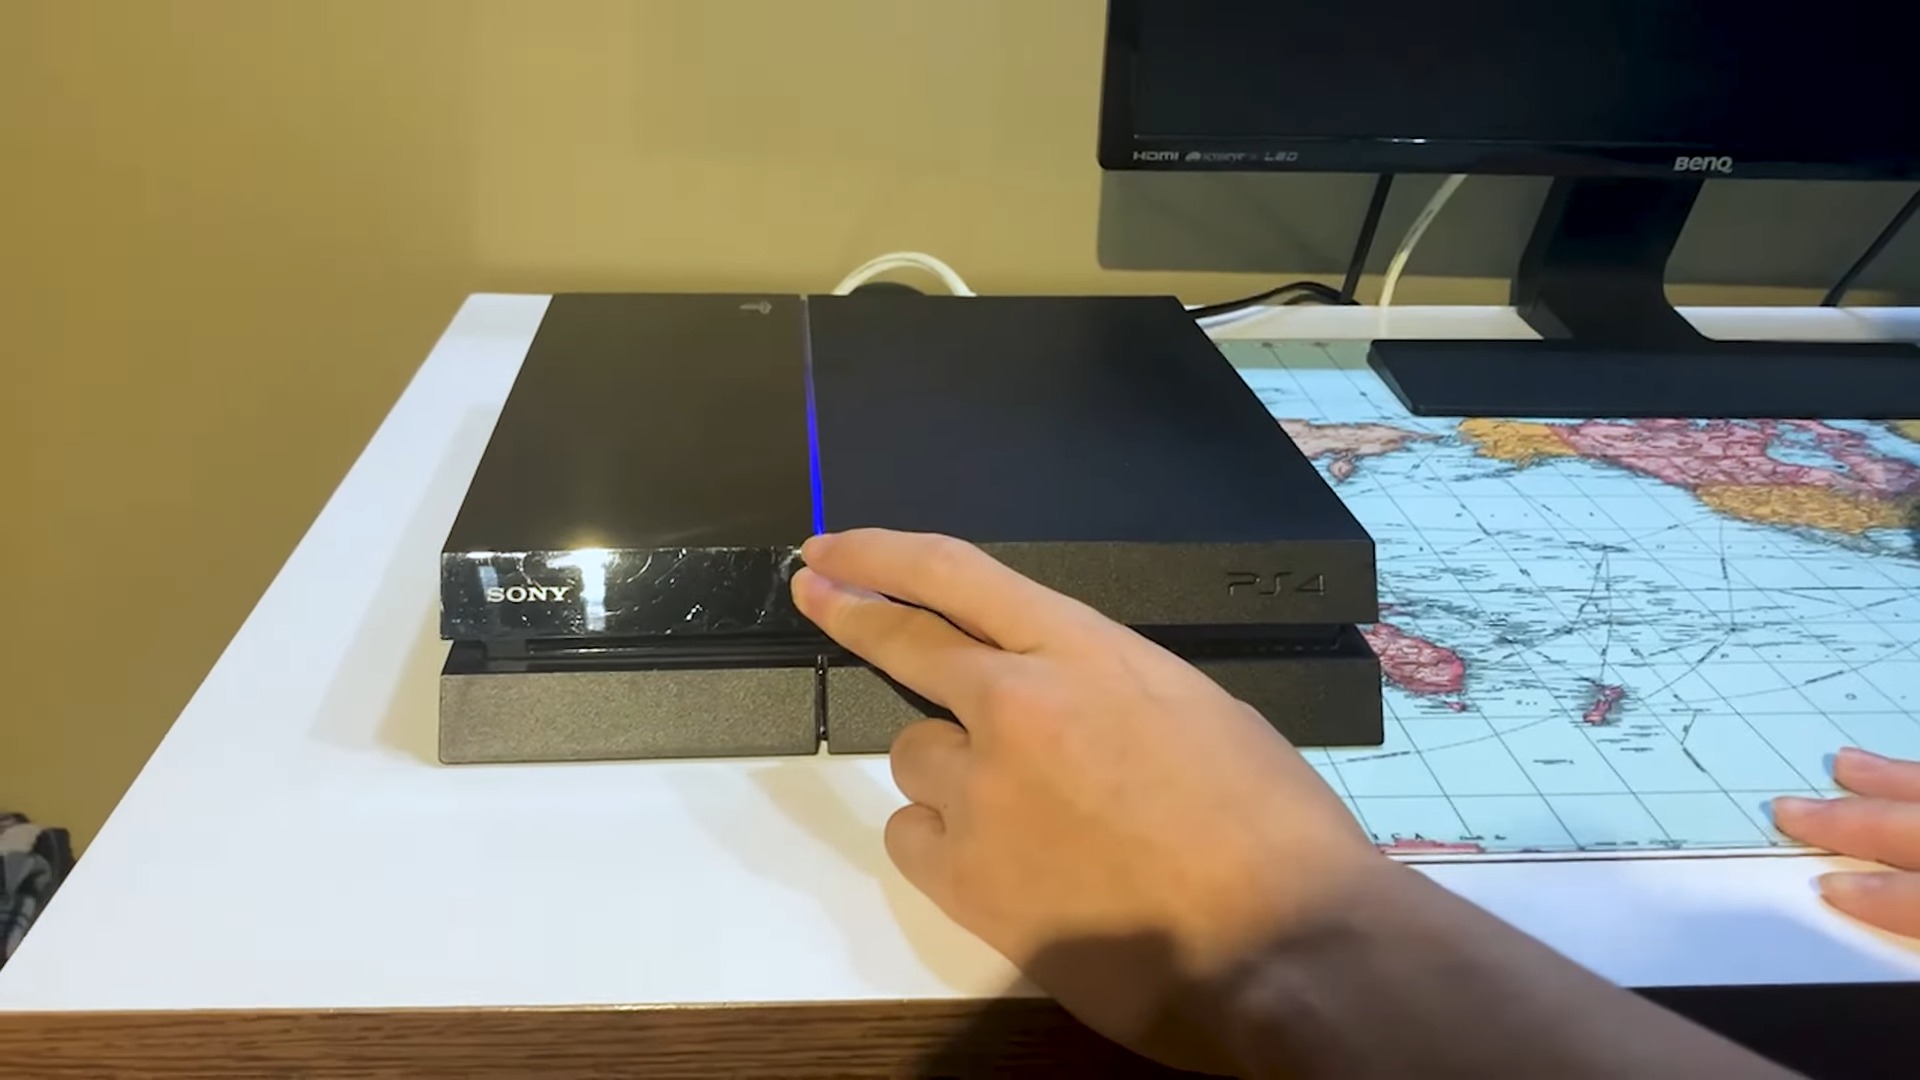 Press And Hold PS4 Power Button